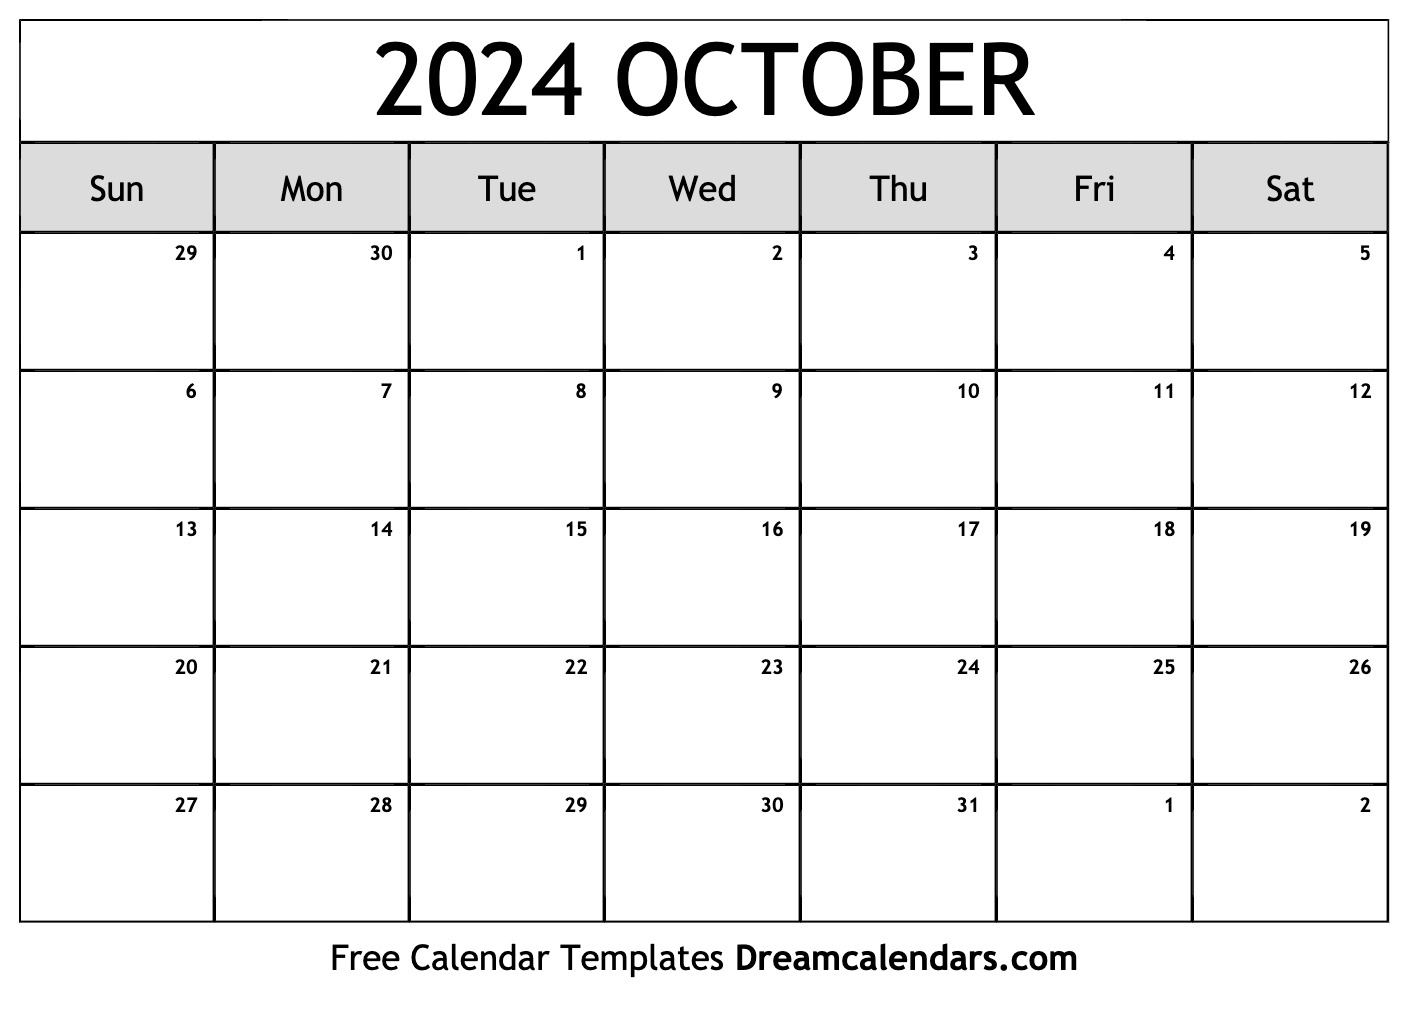 October 2024 Calendar | Free Blank Printable With Holidays for Calendar 2024 October Printable